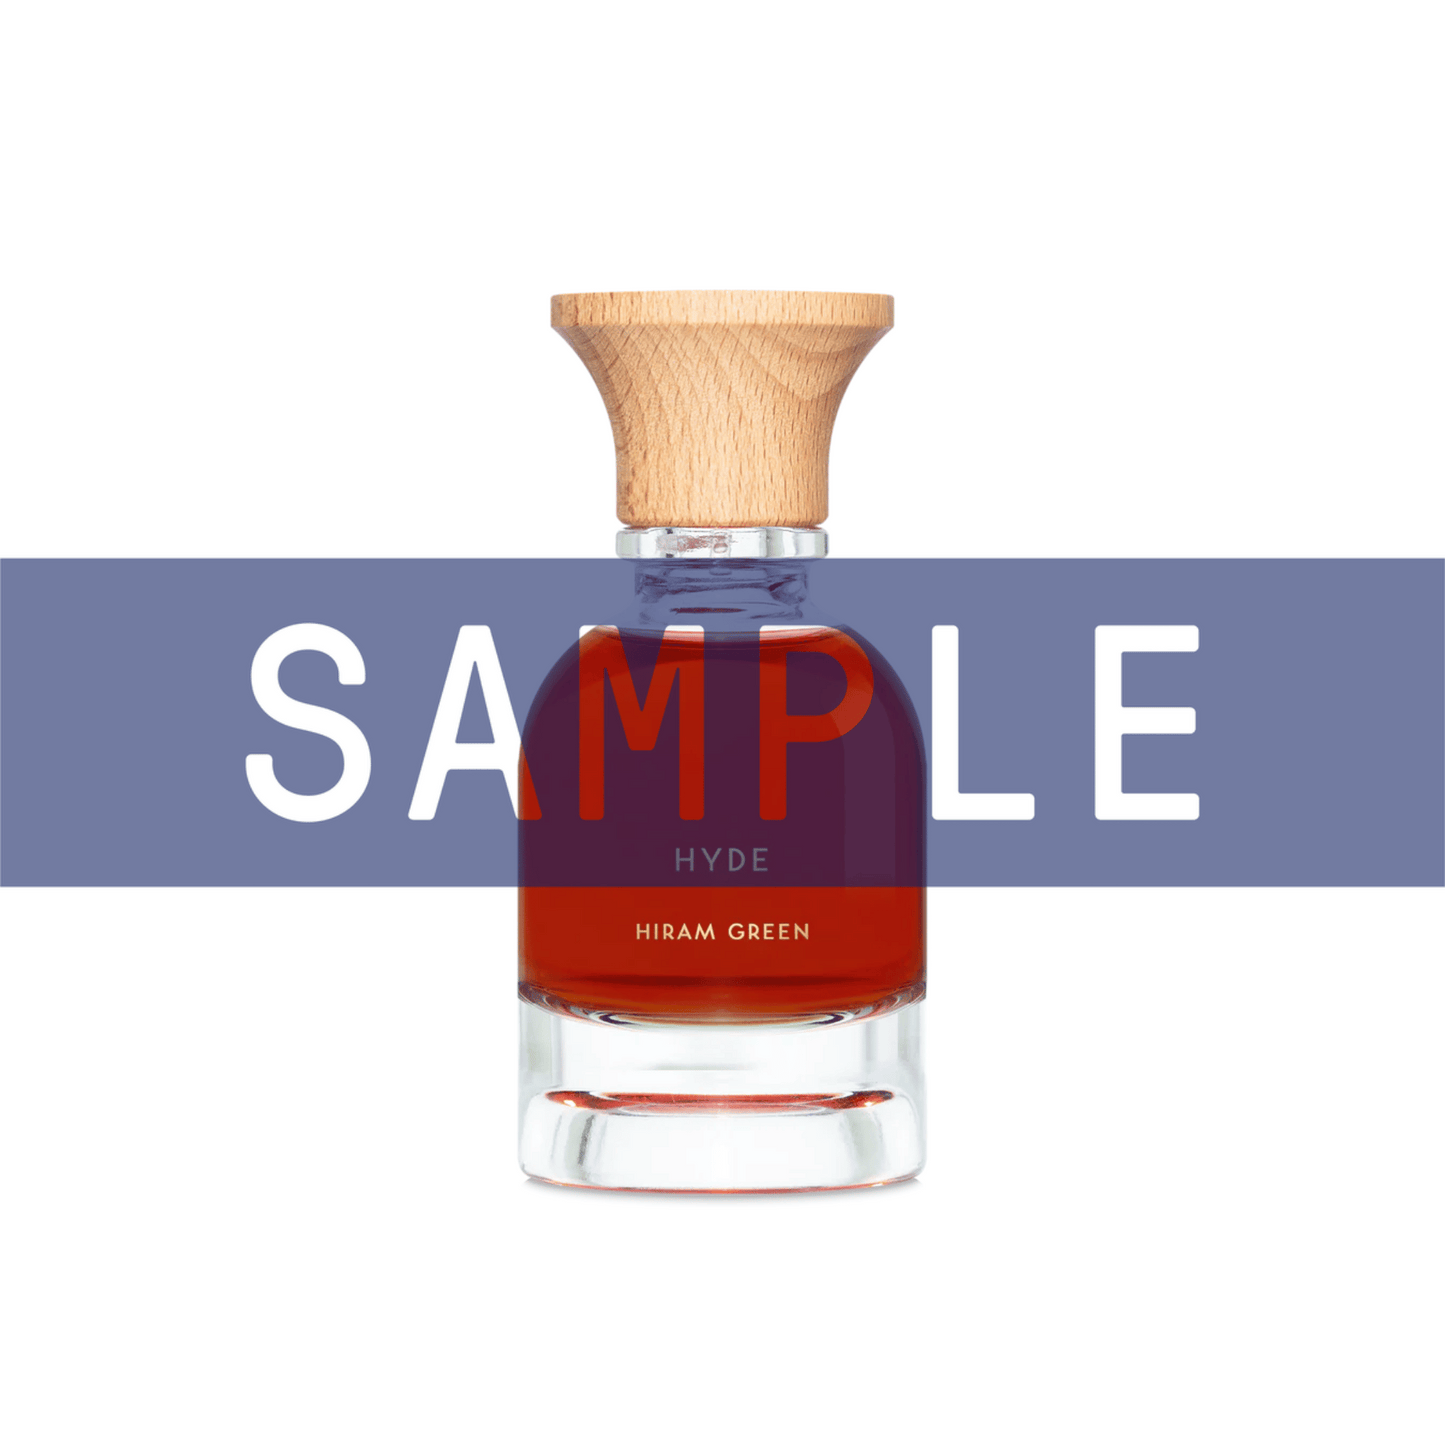 Primary Image of Sample - Hyde EDP